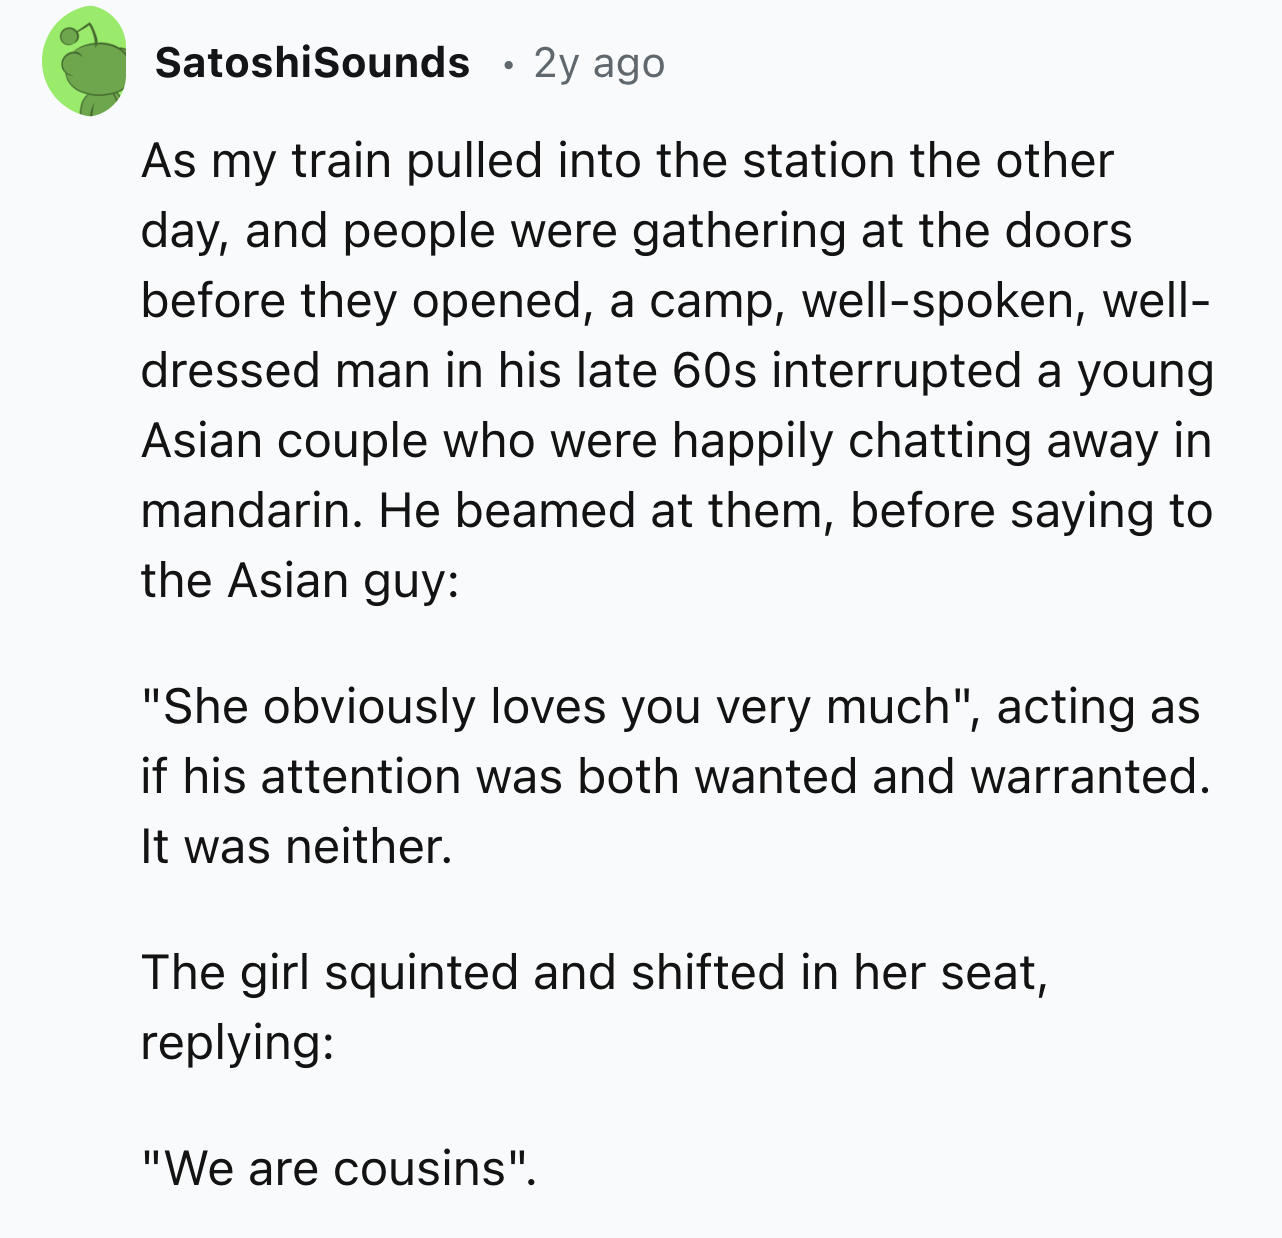 number - SatoshiSounds 2y ago As my train pulled into the station the other day, and people were gathering at the doors before they opened, a camp, wellspoken, well dressed man in his late 60s interrupted a young Asian couple who were happily chatting awa